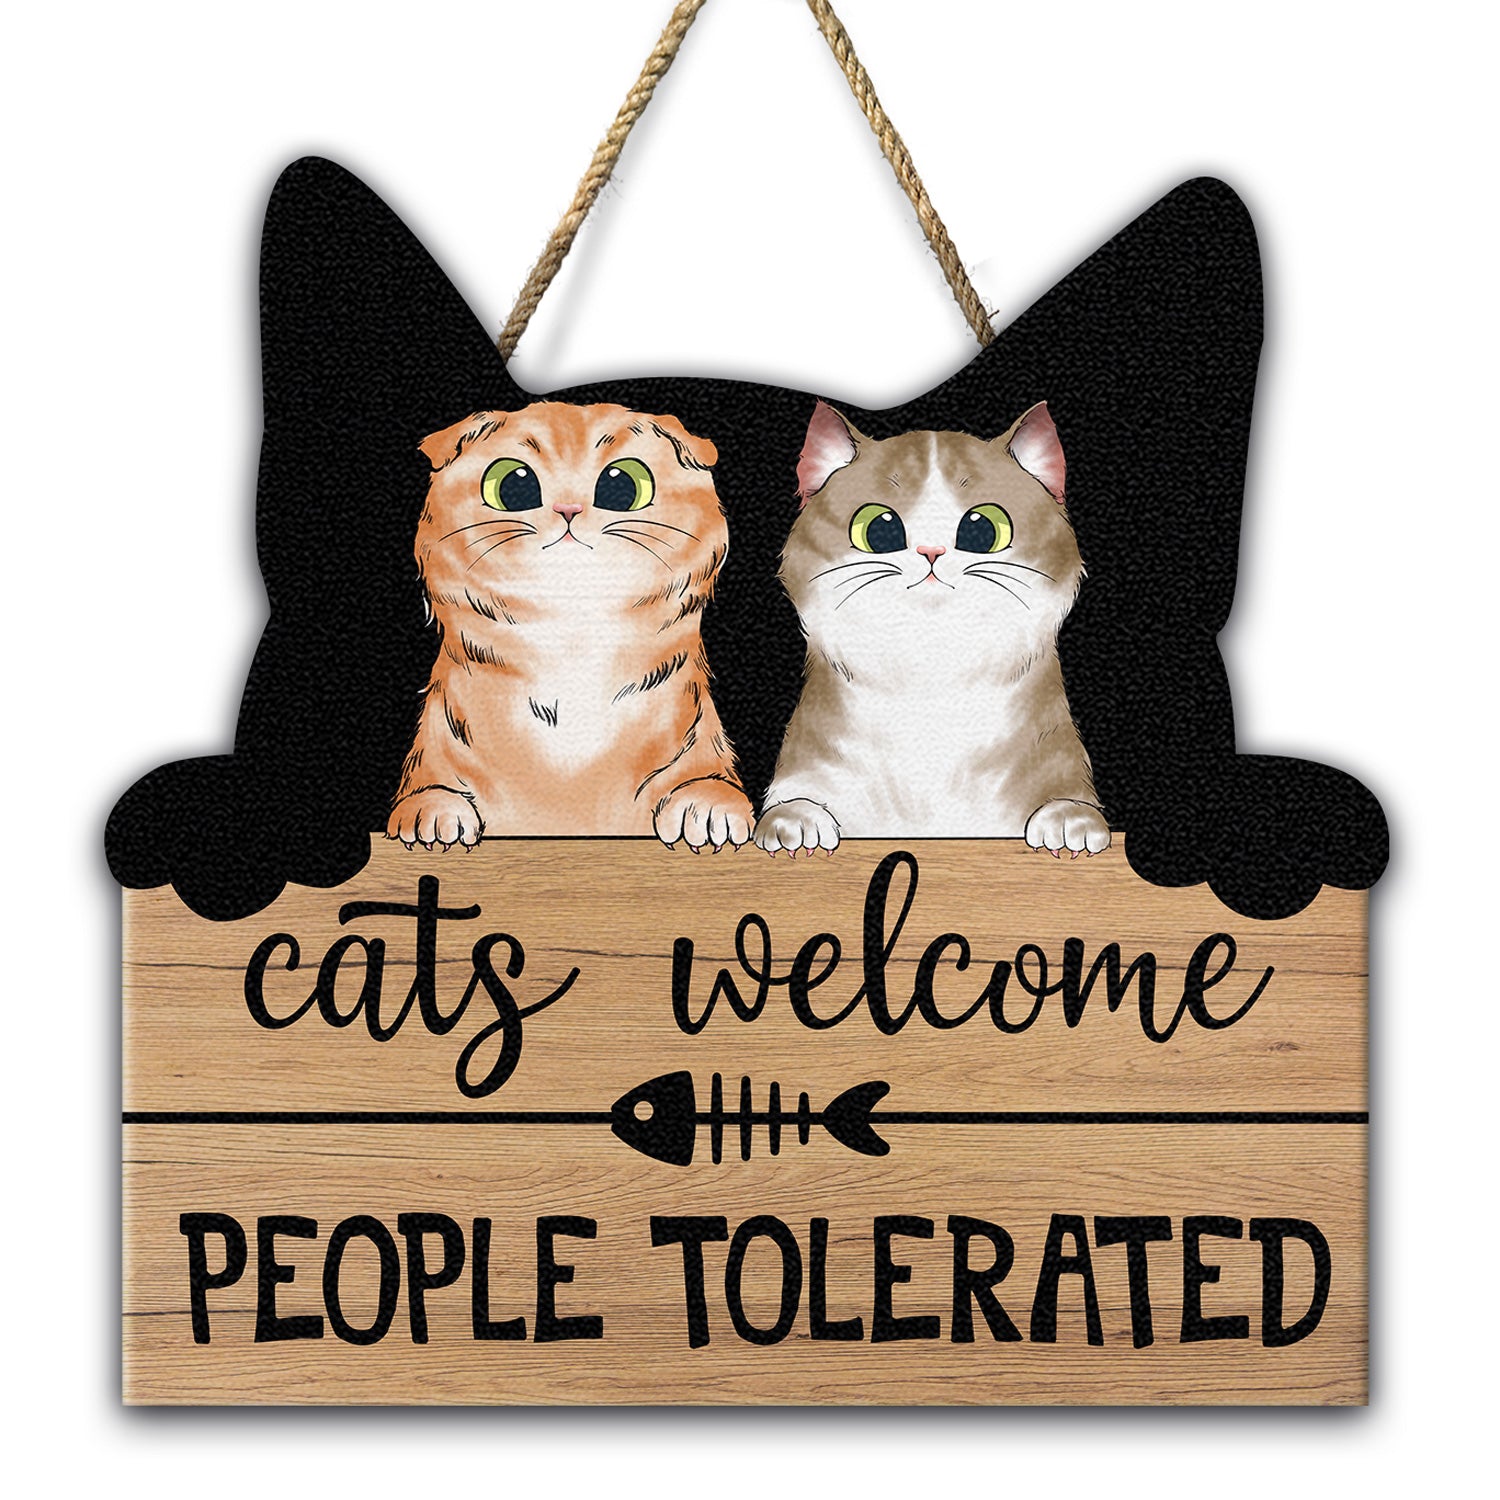 Cats Welcome People Tolerated - Home Decor, Housewarming Gift For Cat Lovers - Personalized Custom Shaped Wood Sign